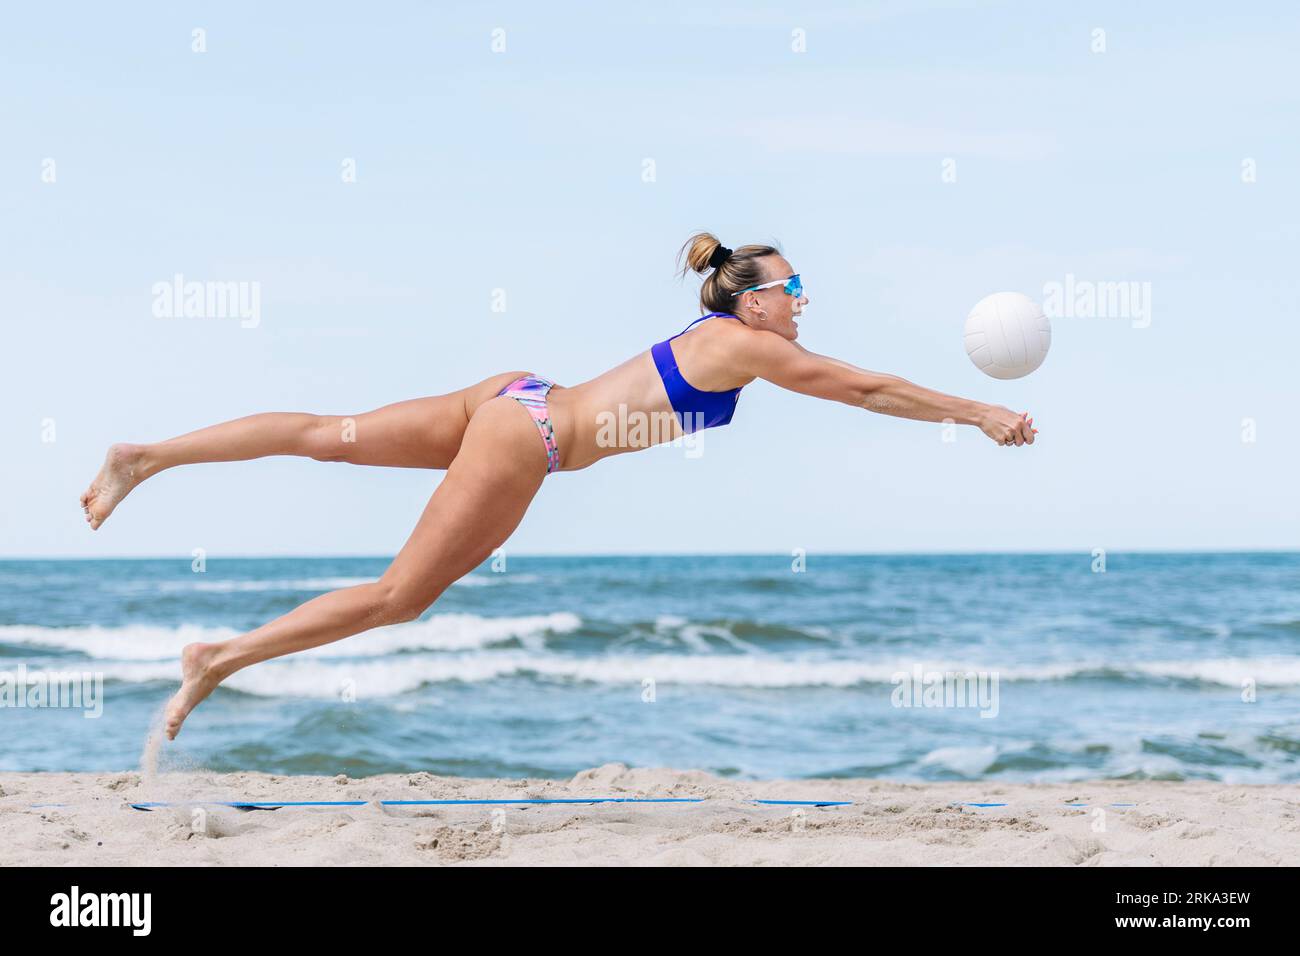 Professional player woman playing volleyball on the beach. Horizontal sport theme poster, greeting cards, headers, website and app Stock Photo